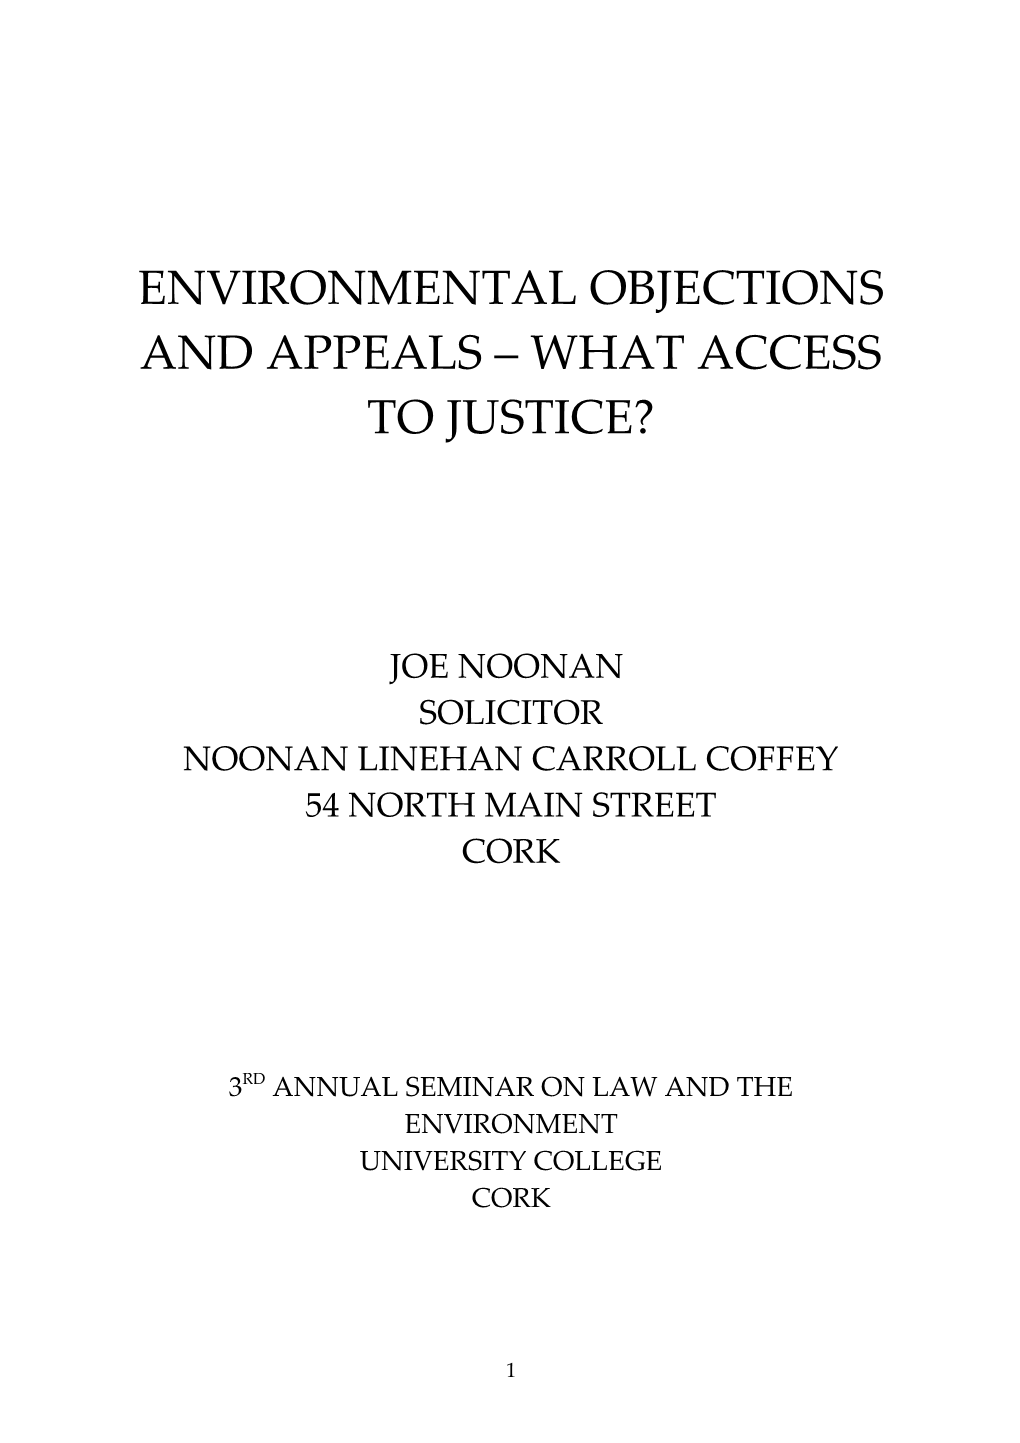 Environmental Objections and Appeals What Access to Justice?